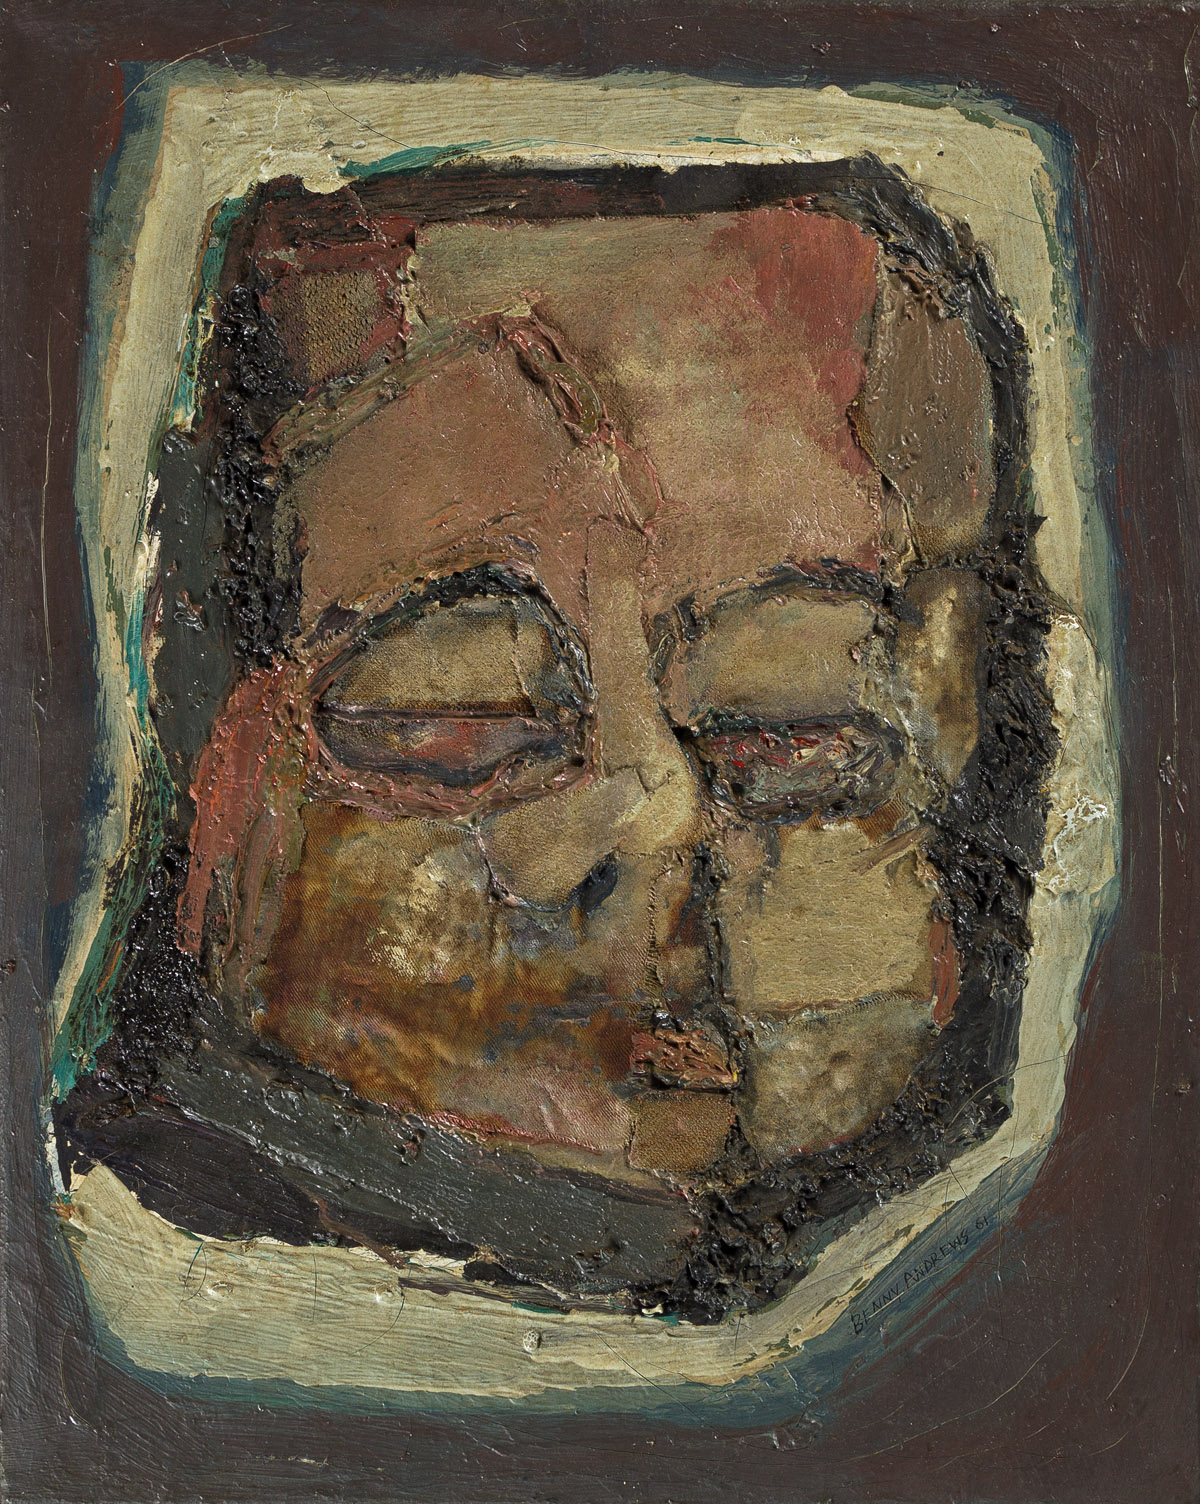 BENNY ANDREWS (1930 - 2006) Mask of a Life.